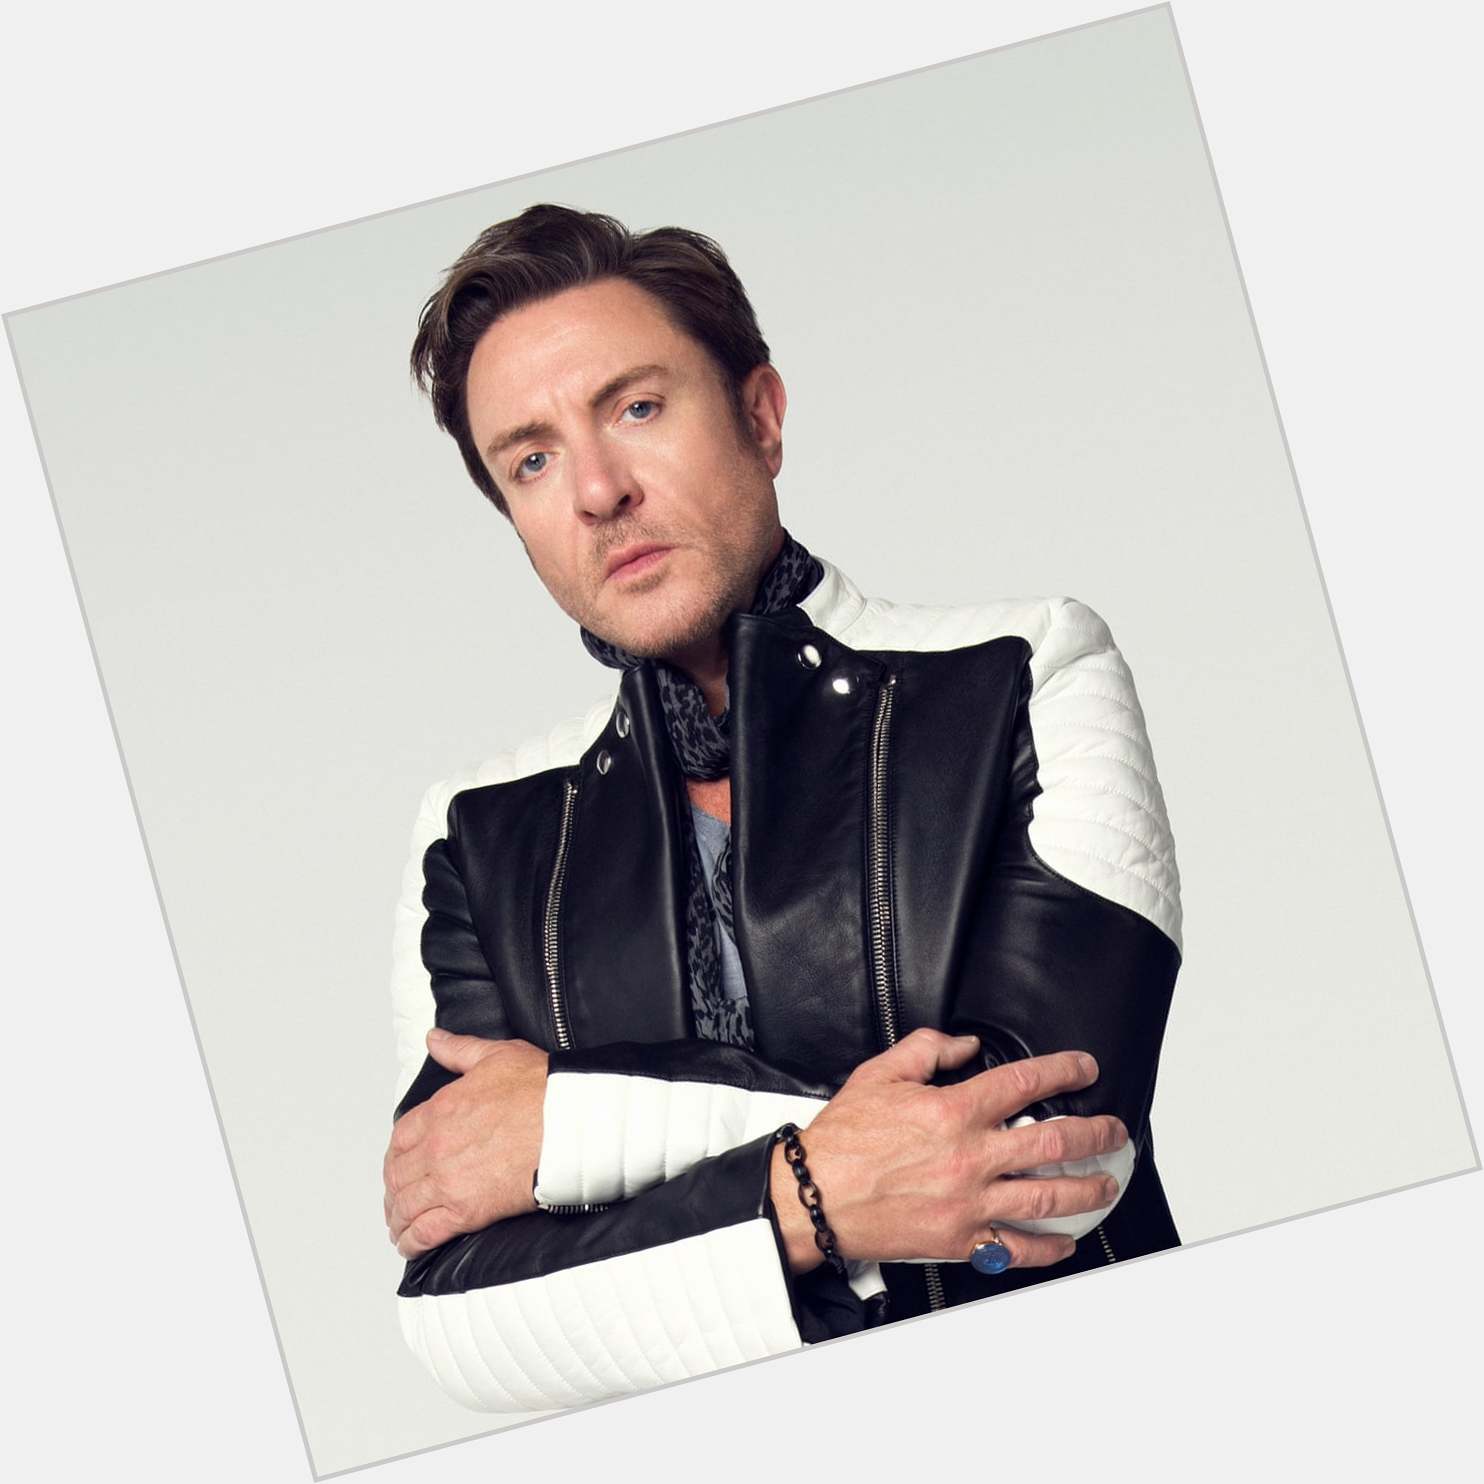 Please join us here at in wishing the one and only Simon Le Bon a very Happy 62nd Birthday today  